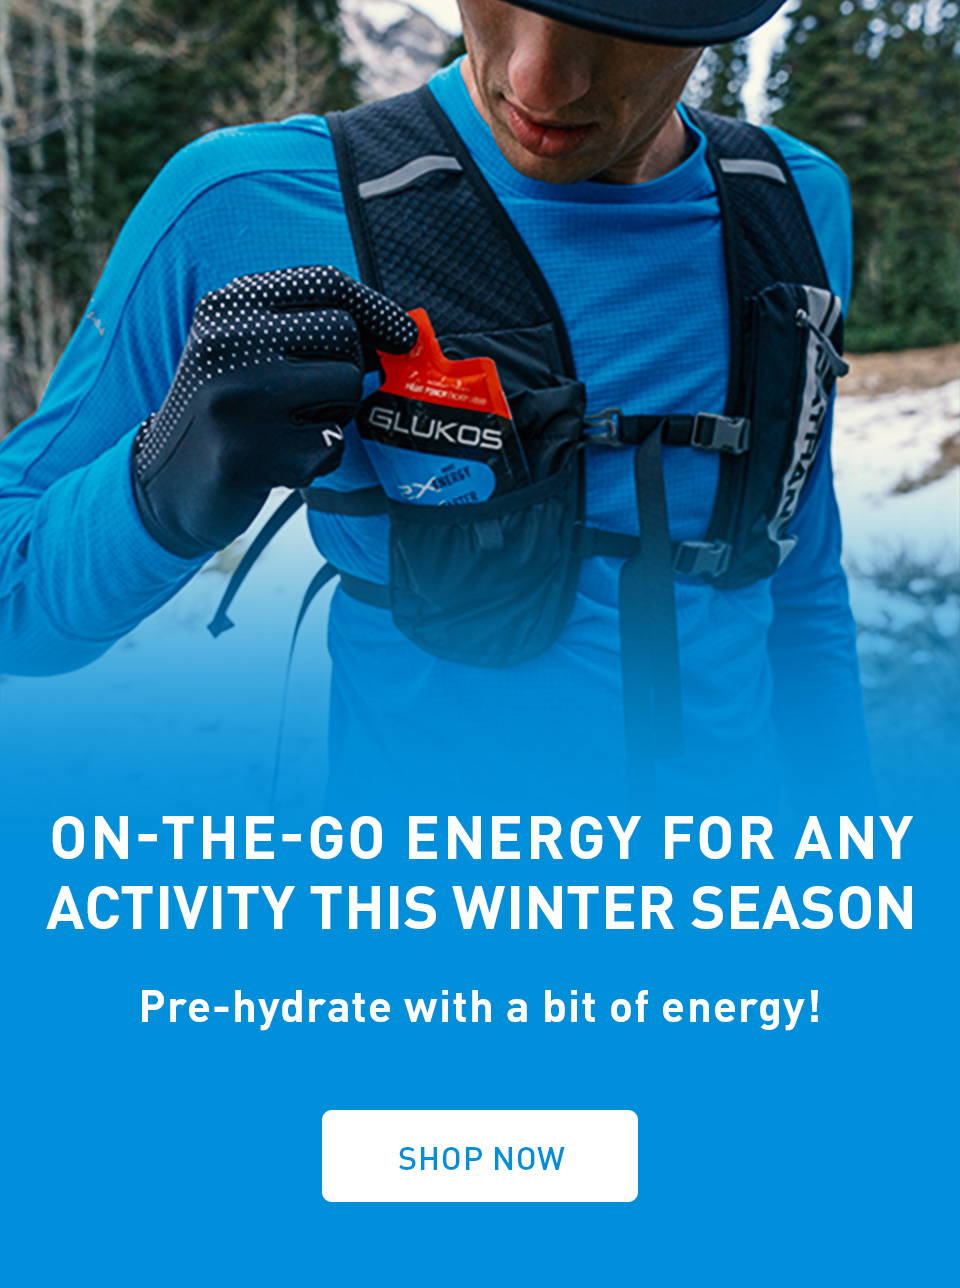 On-the-go energy for any activity this winter season. Pre-hydrate with a bit of energy! SHOP NOW